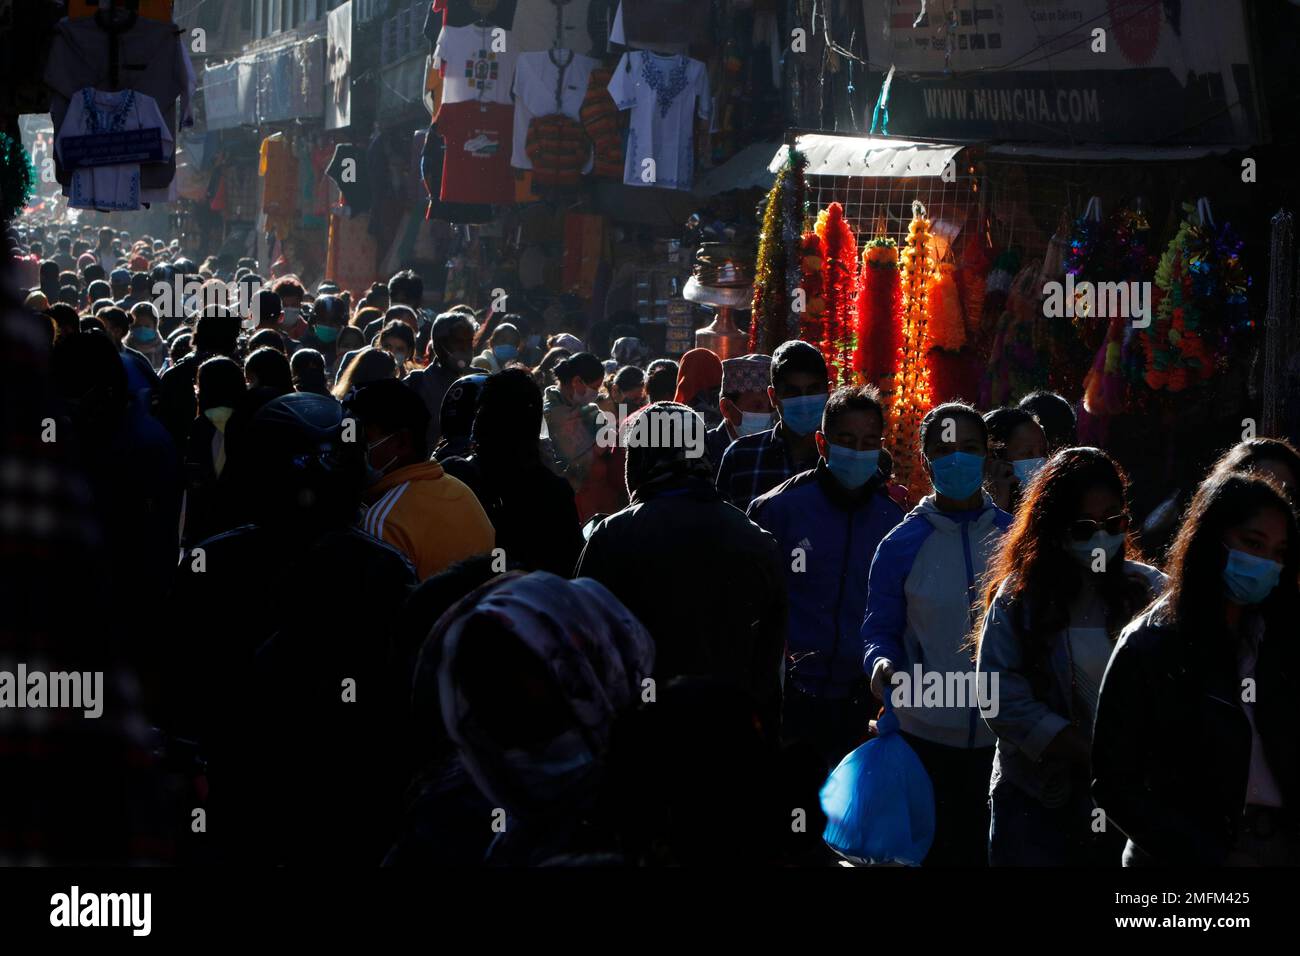 Shoppers Crowd The Ason Market During First Day Of Tihar Festival In